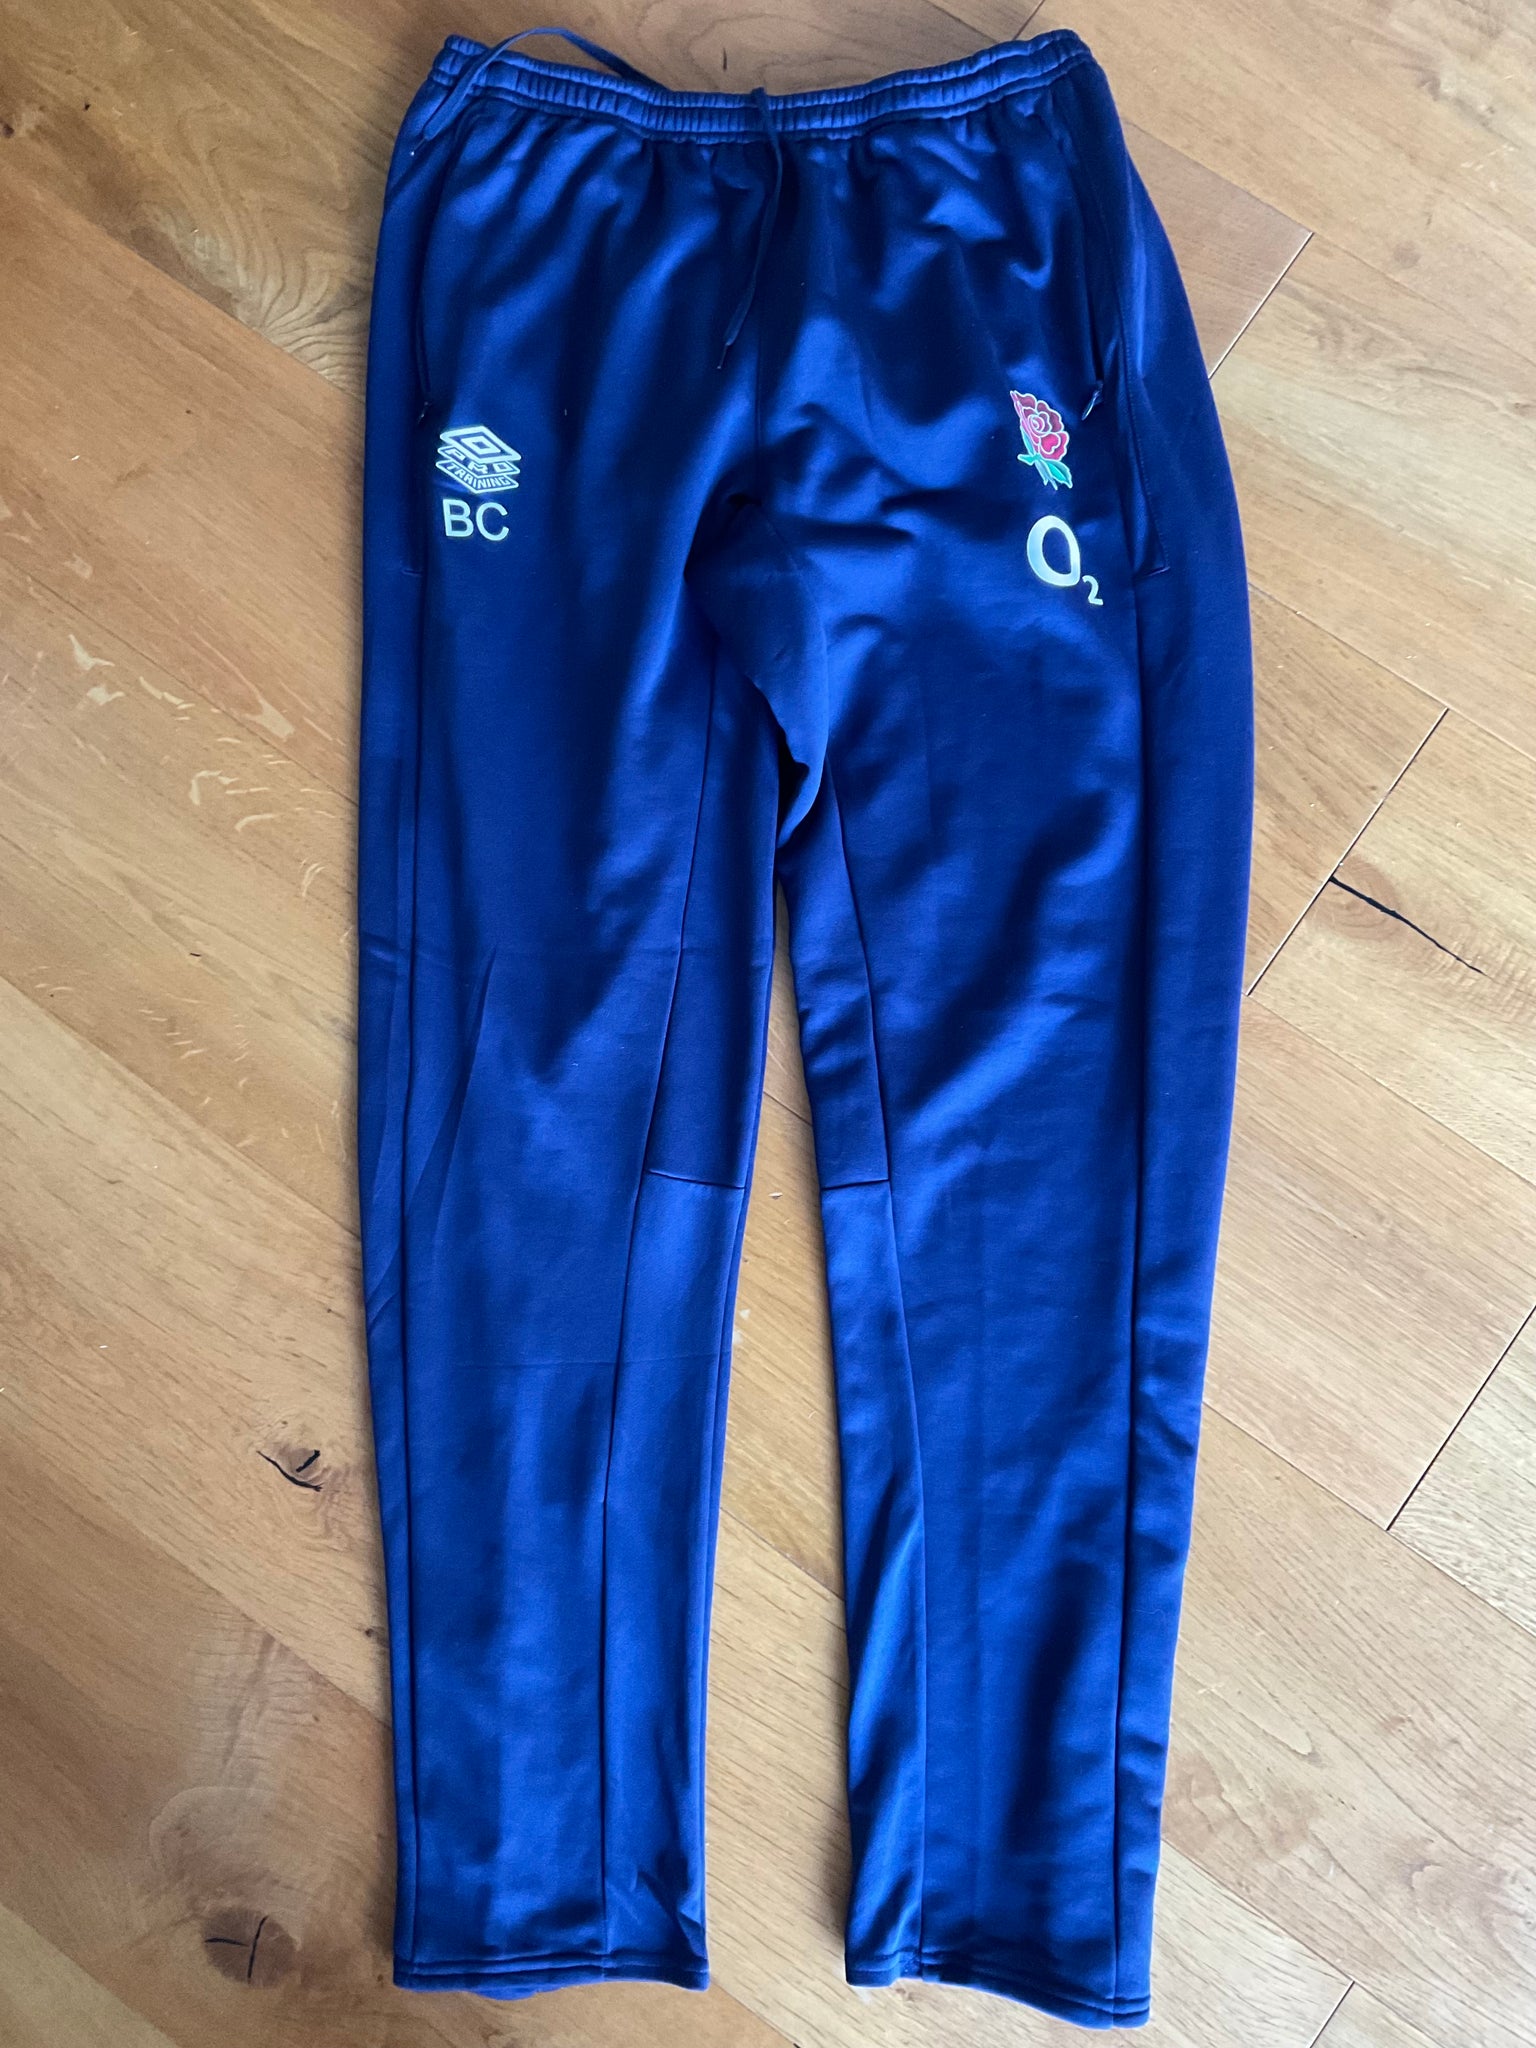 Ben Curry - England Rugby Jogging Pants [Blue]